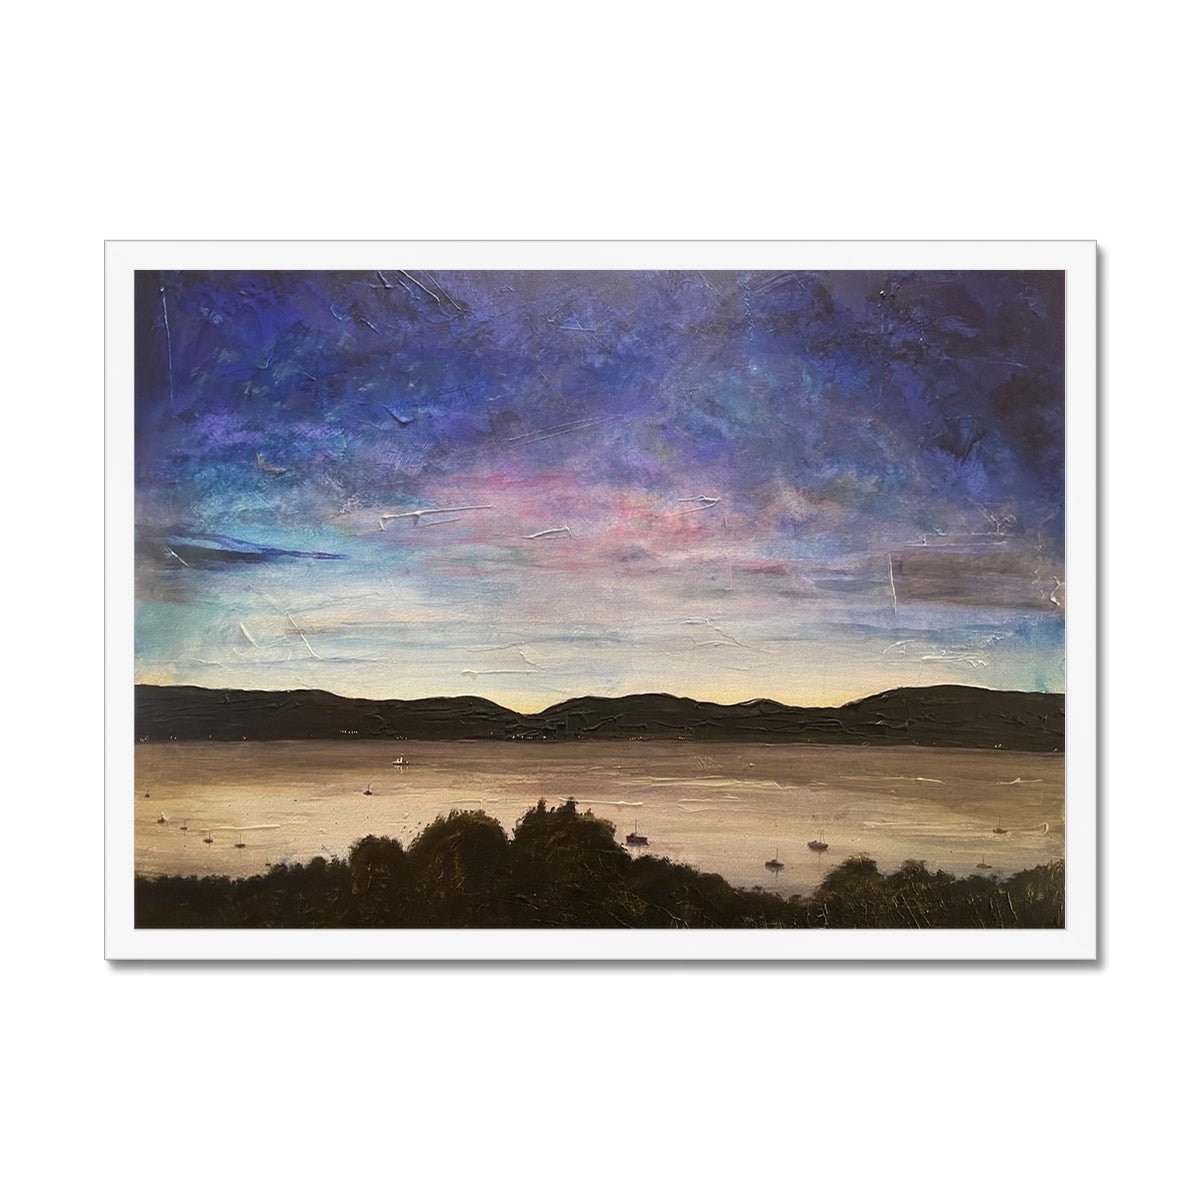 River Clyde Twilight Painting | Framed Prints From Scotland-Framed Prints-River Clyde Art Gallery-A2 Landscape-White Frame-Paintings, Prints, Homeware, Art Gifts From Scotland By Scottish Artist Kevin Hunter